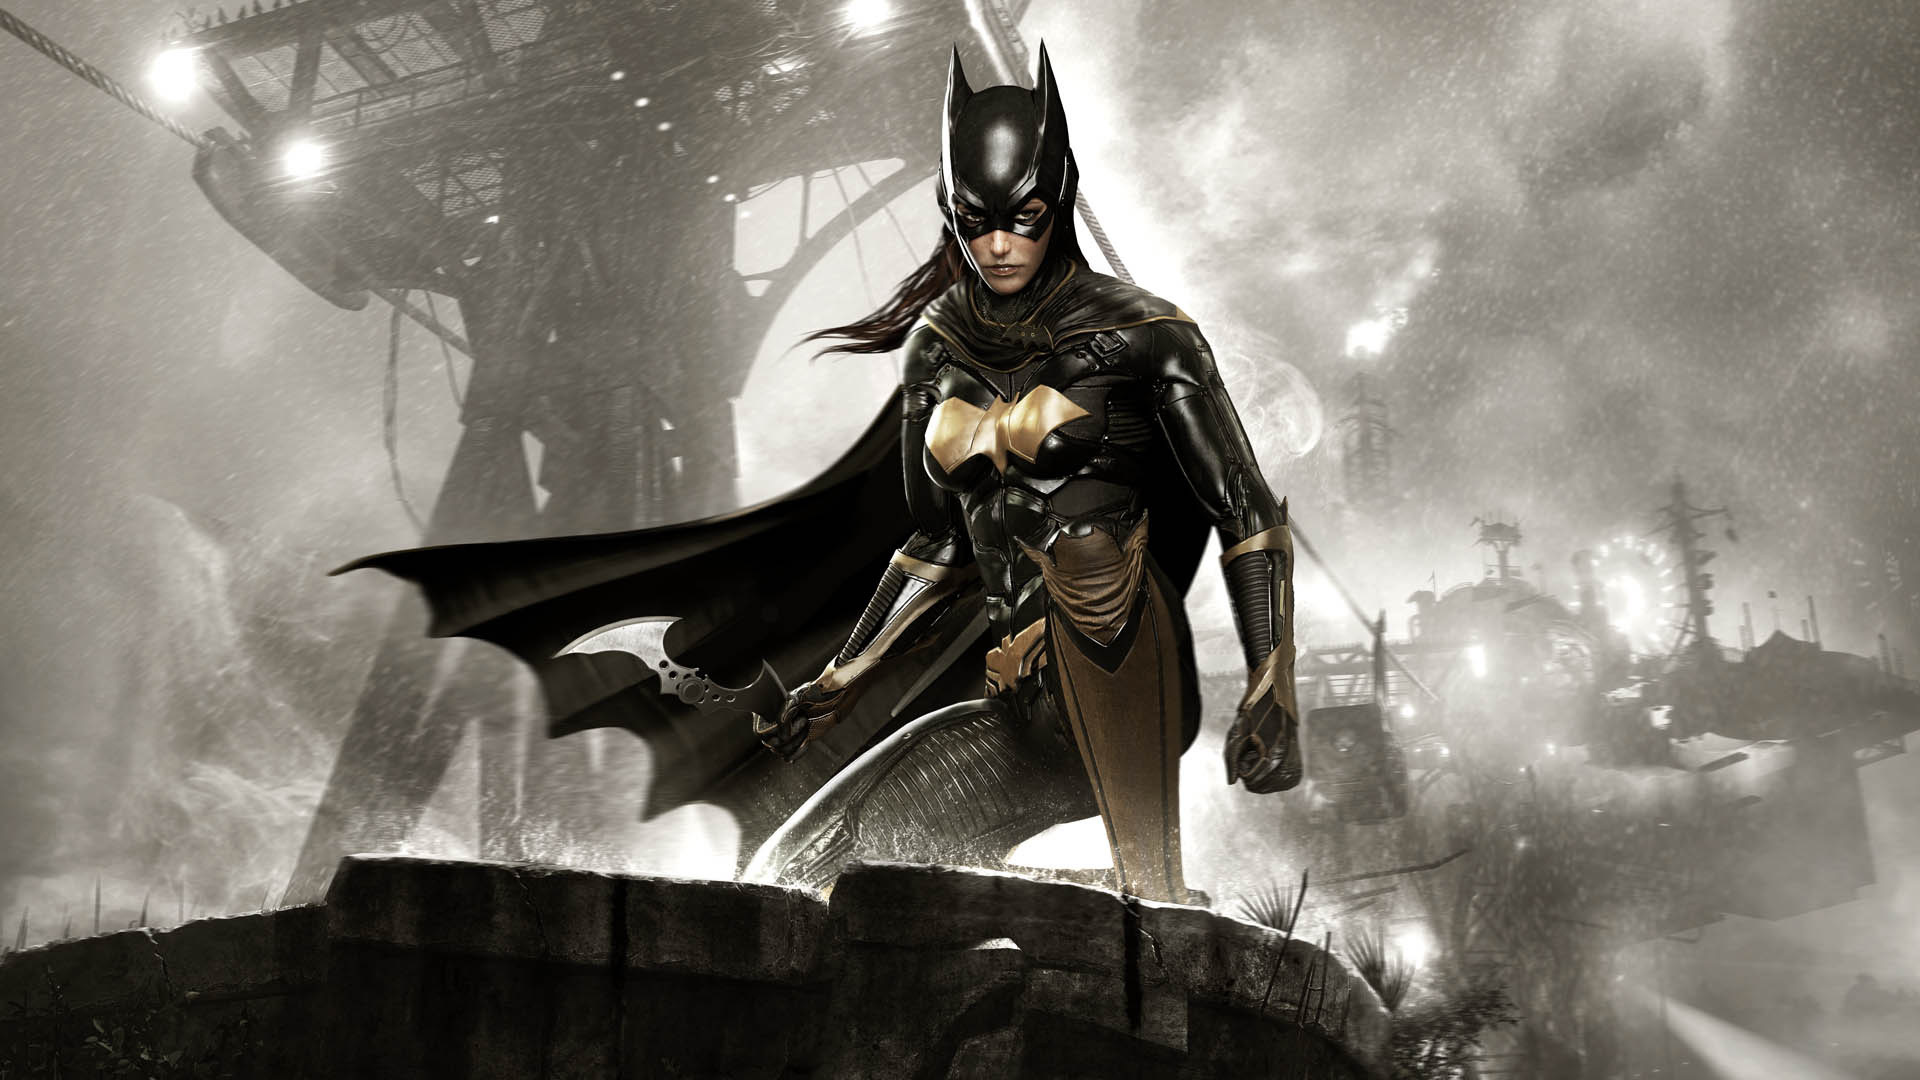 Batgirl 4K wallpaper for your desktop or mobile screen free and easy to download